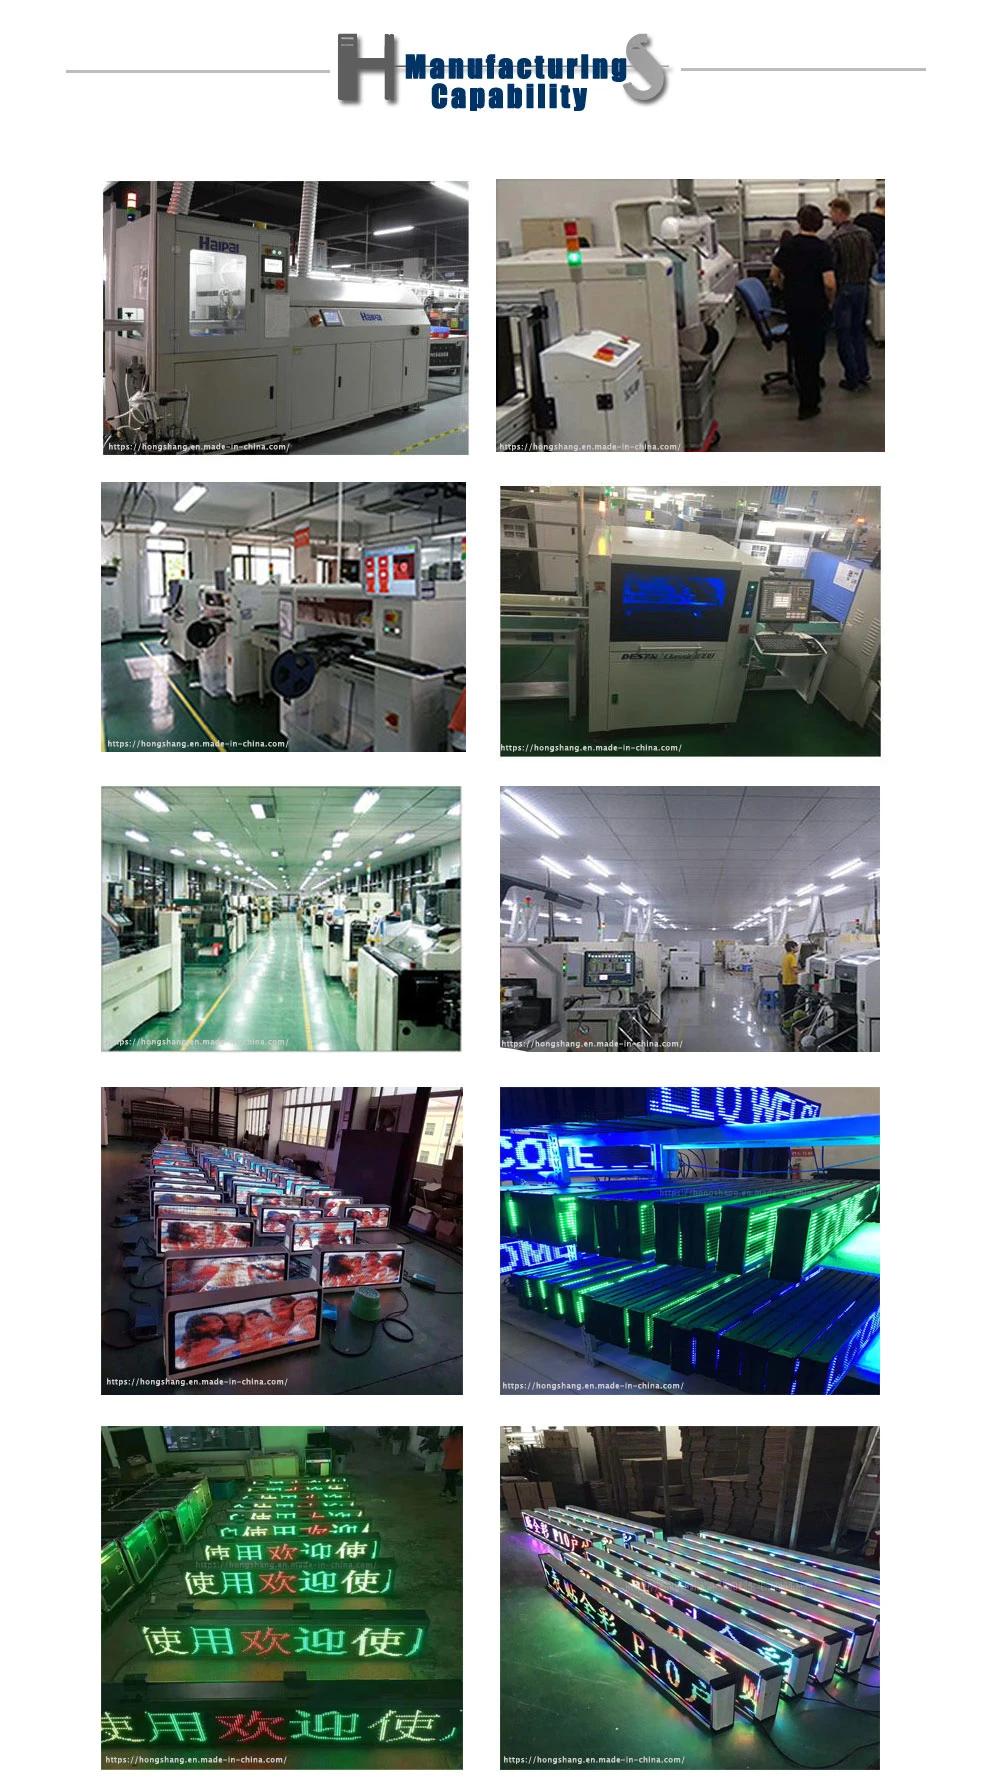 Professional Production LED Digital Advertising Player, Graphic Mobile Screen Panel